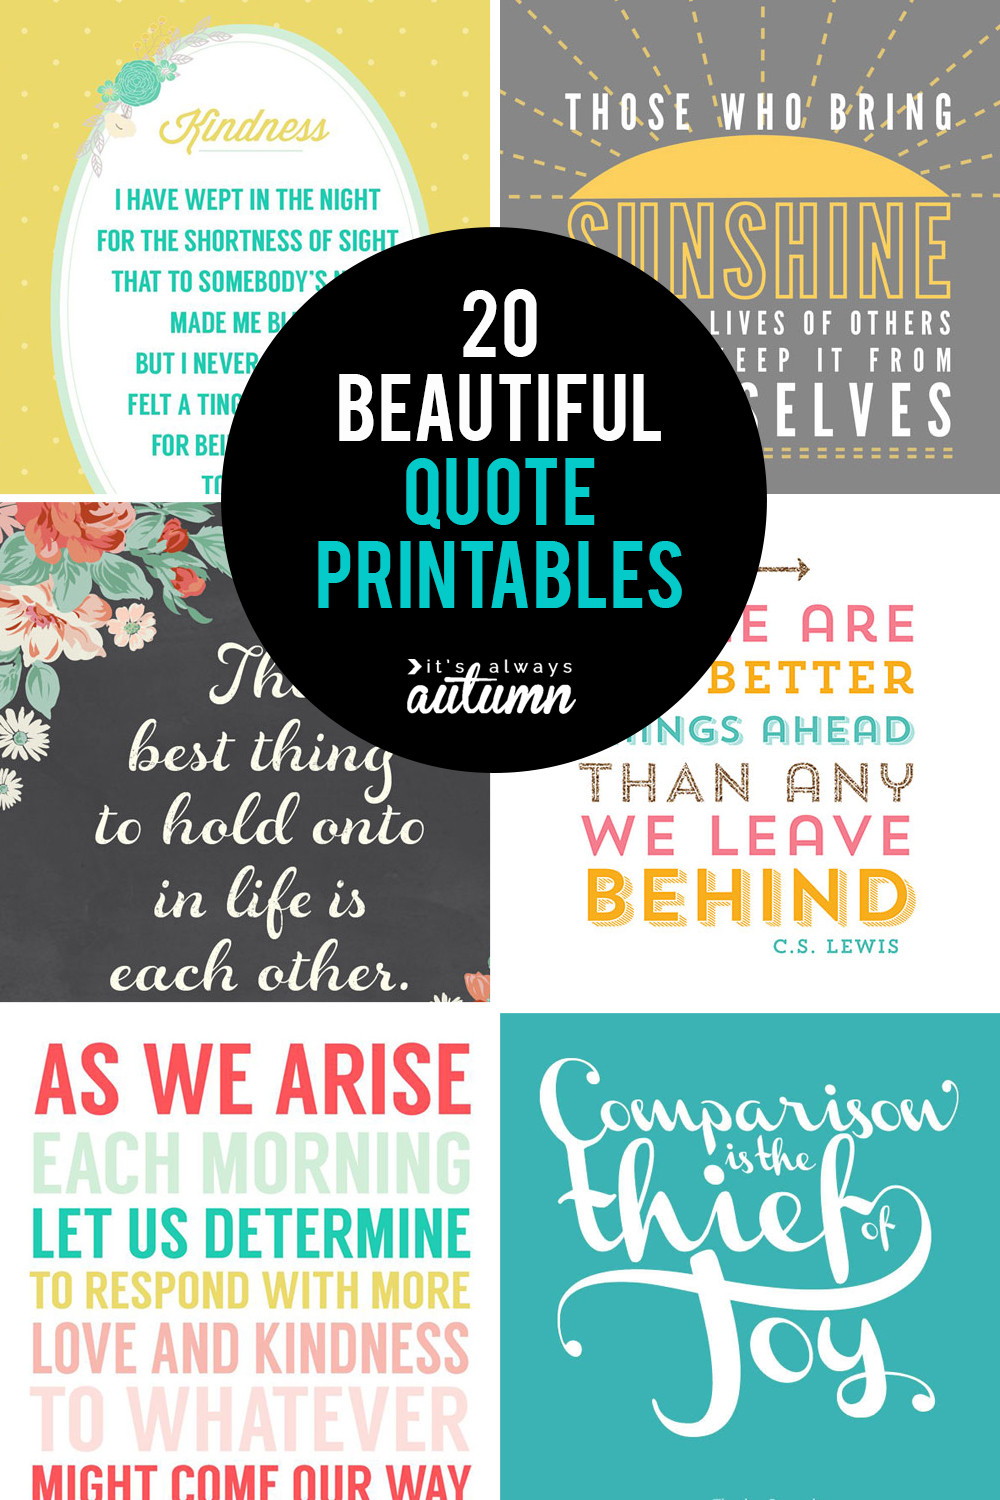 Free Printable Inspirational Quotes
 20 gorgeous printable quotes